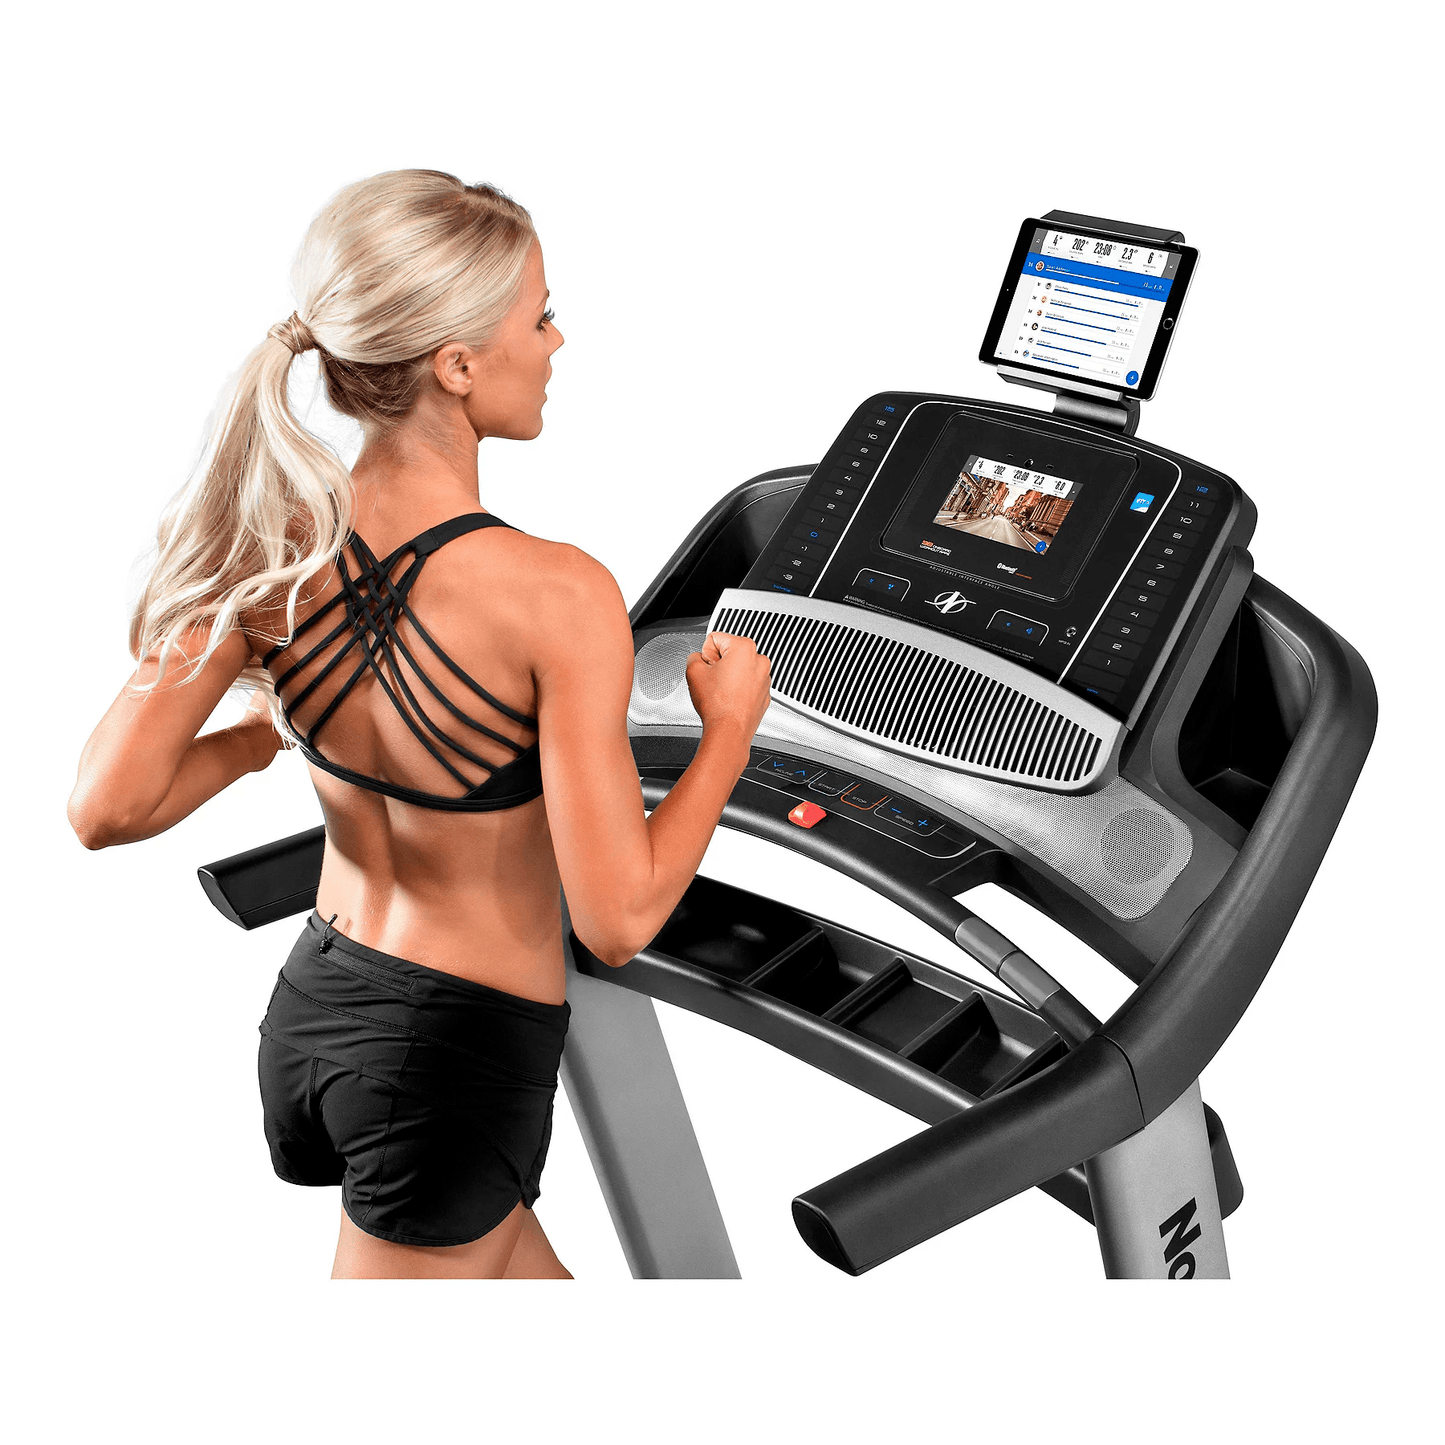 NordicTrack C1750 Folding Treadmill with Smart HD Touchscreen 1750